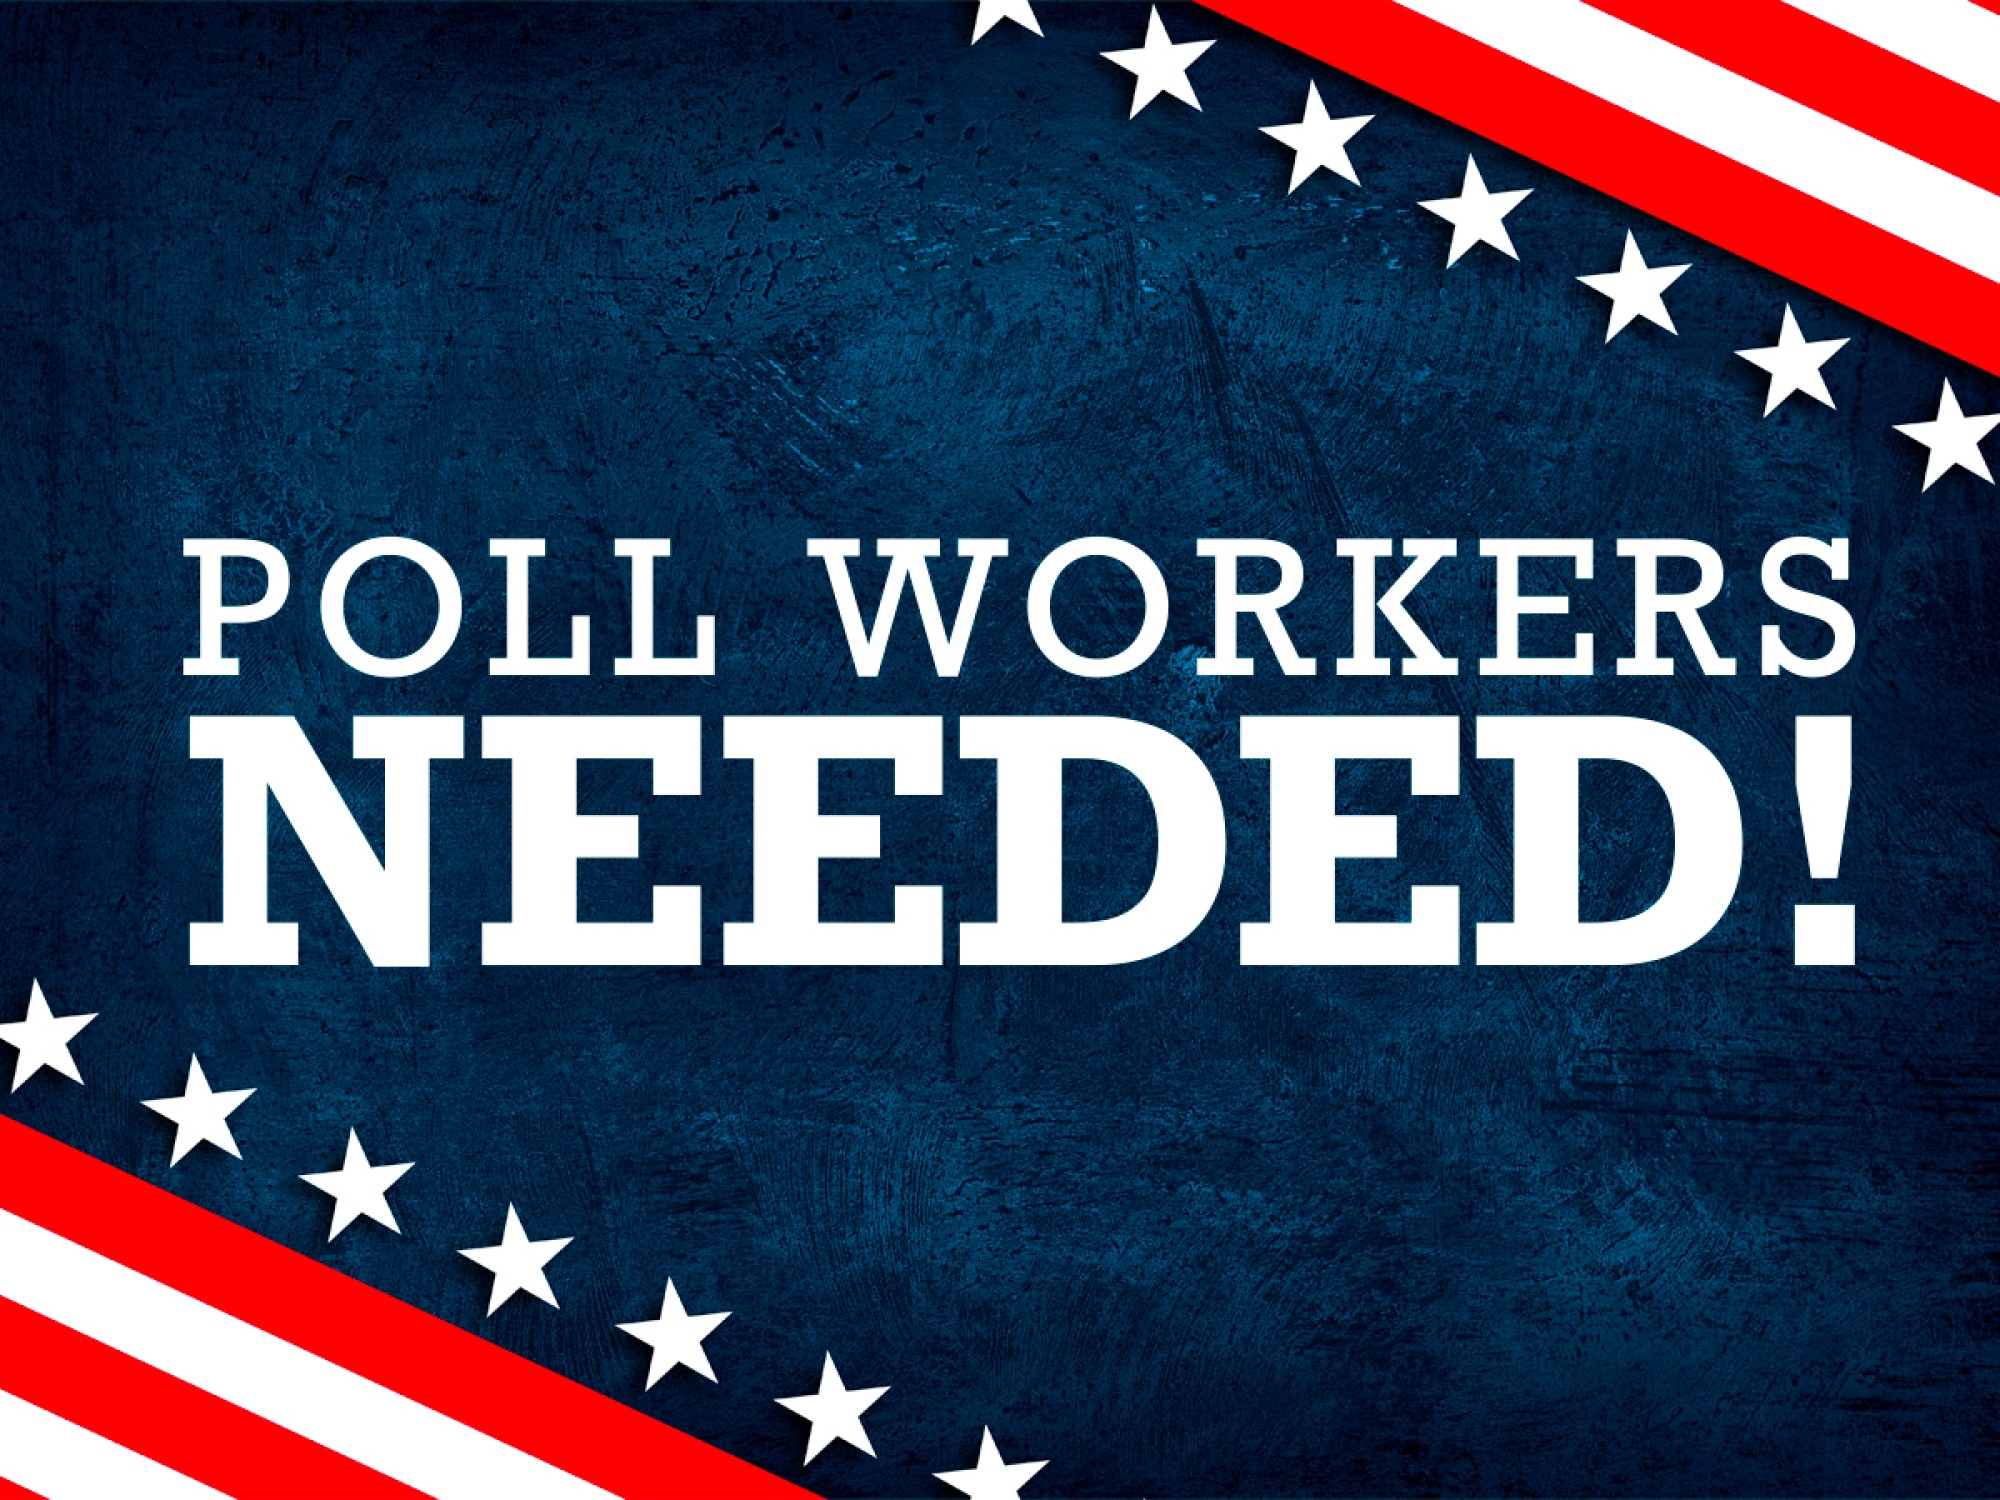 Election Day: NEFAR members are needed to work polls